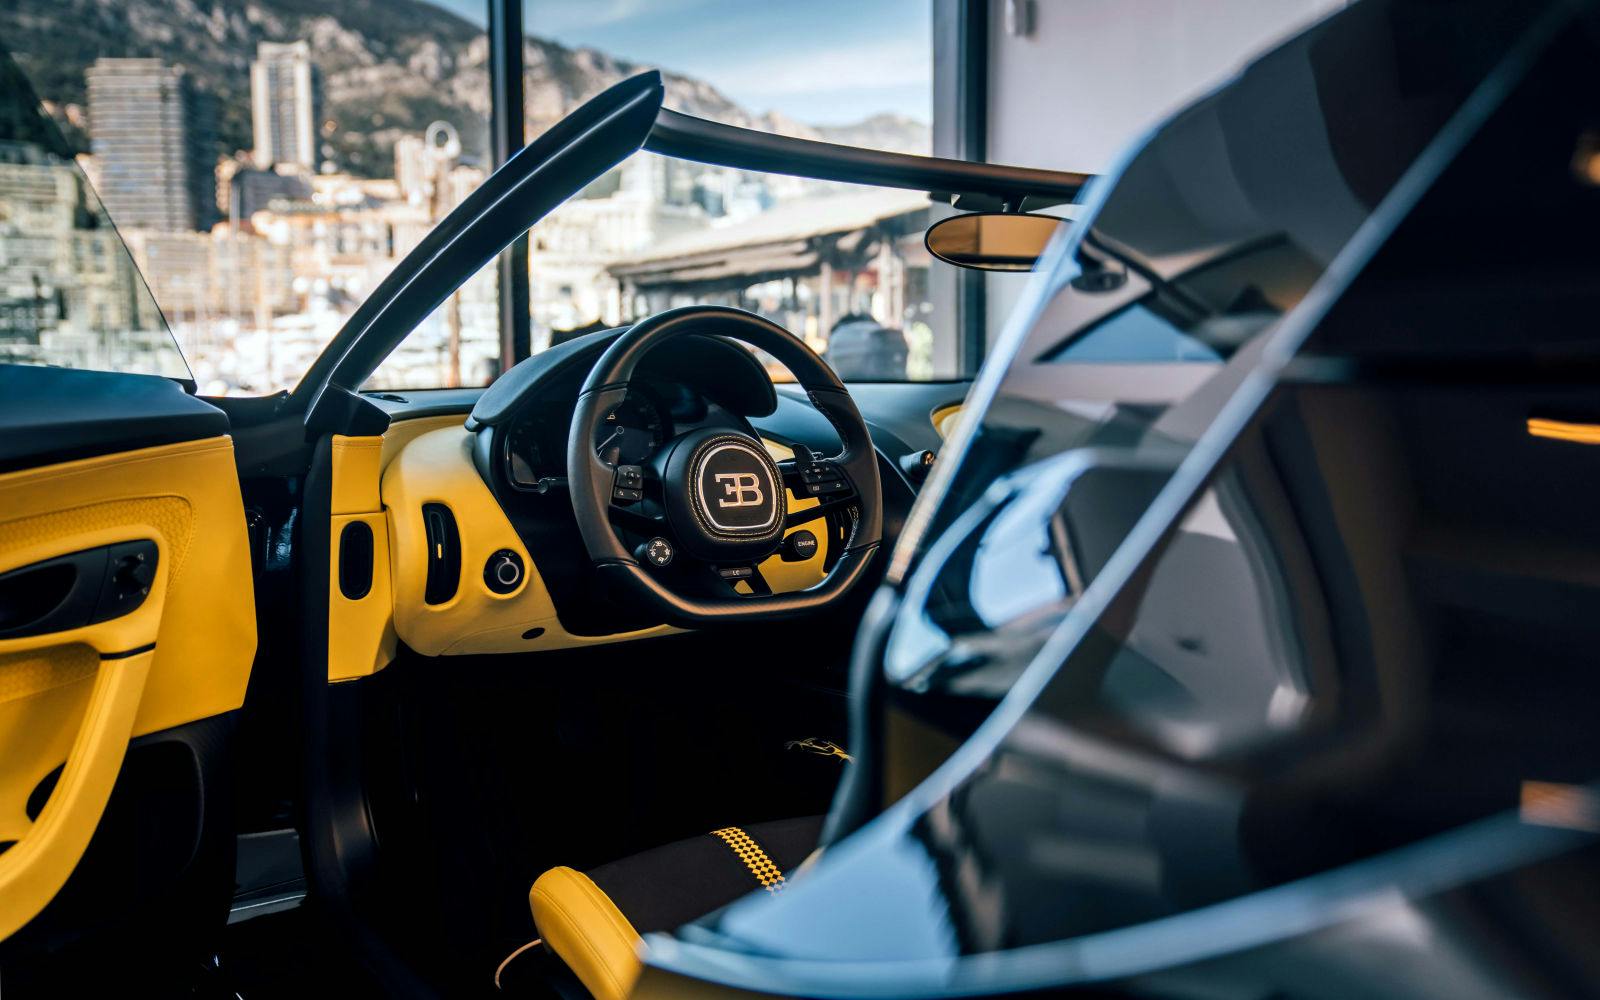 During the opening event of the new Monaco showroom, guests were able to discover in detail the new W16 Mistral, Bugatti's ultimate roadster.